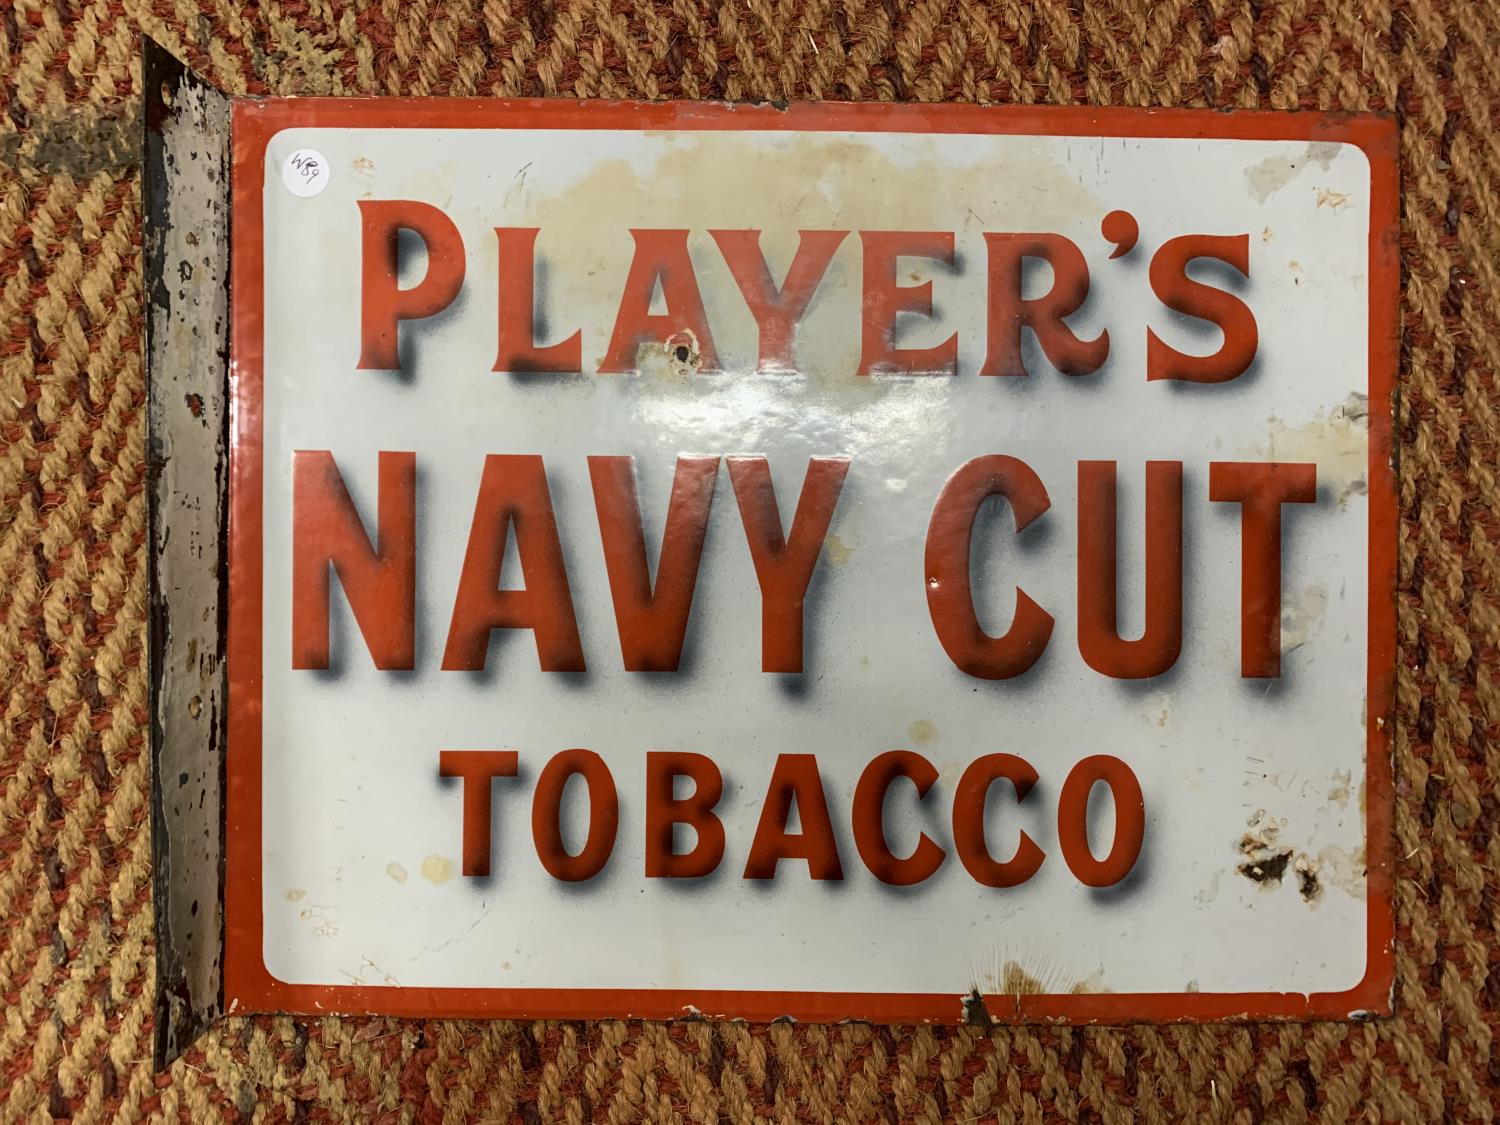 A VINTAGE ENAMEL DOUBLE SIDED SIGN "PLAYERS NAVY CUTY CIGARETTES" - Image 2 of 2